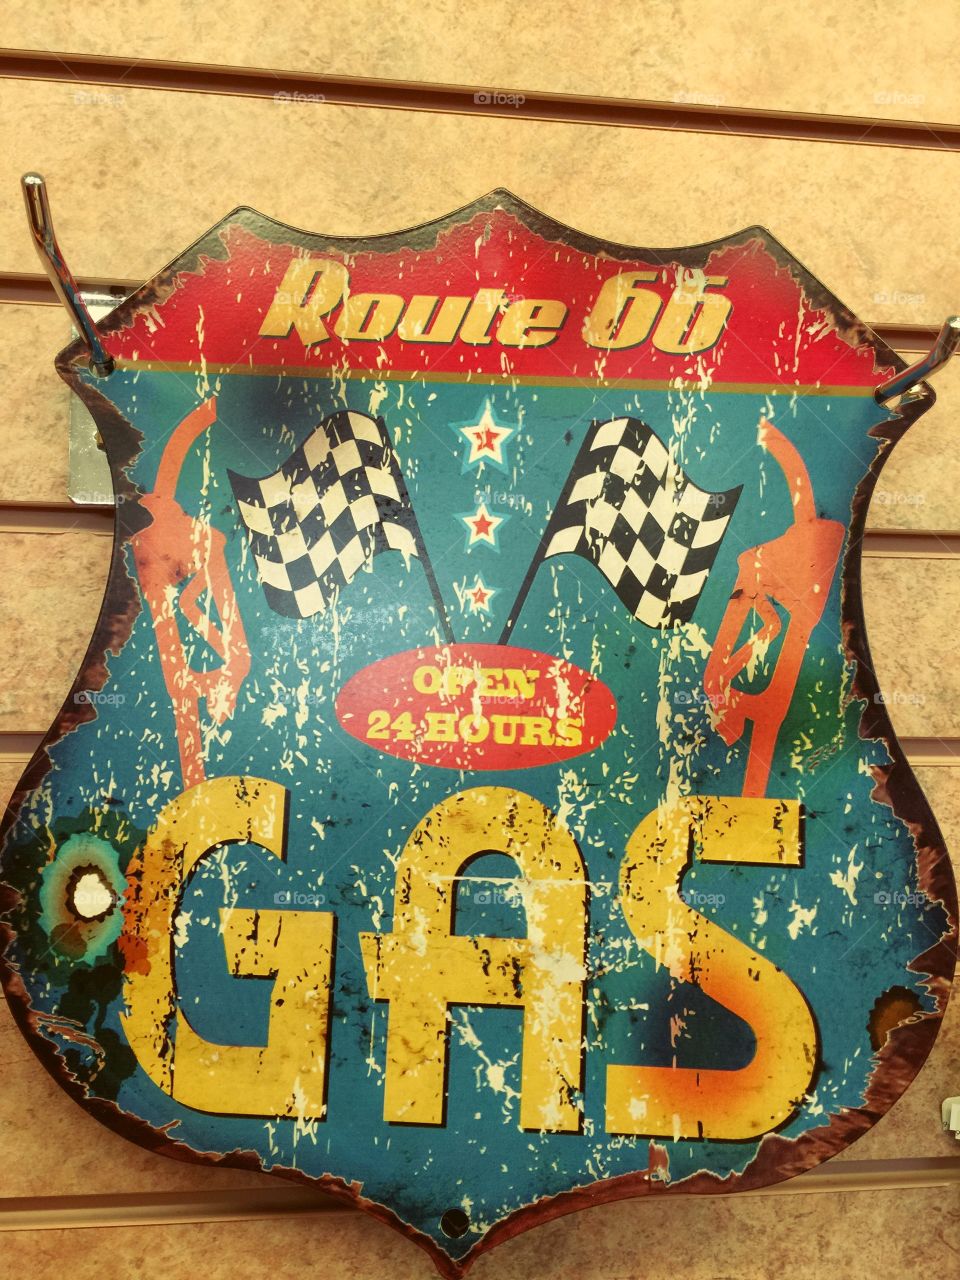 Vintage historic Route 66 gas station sign 